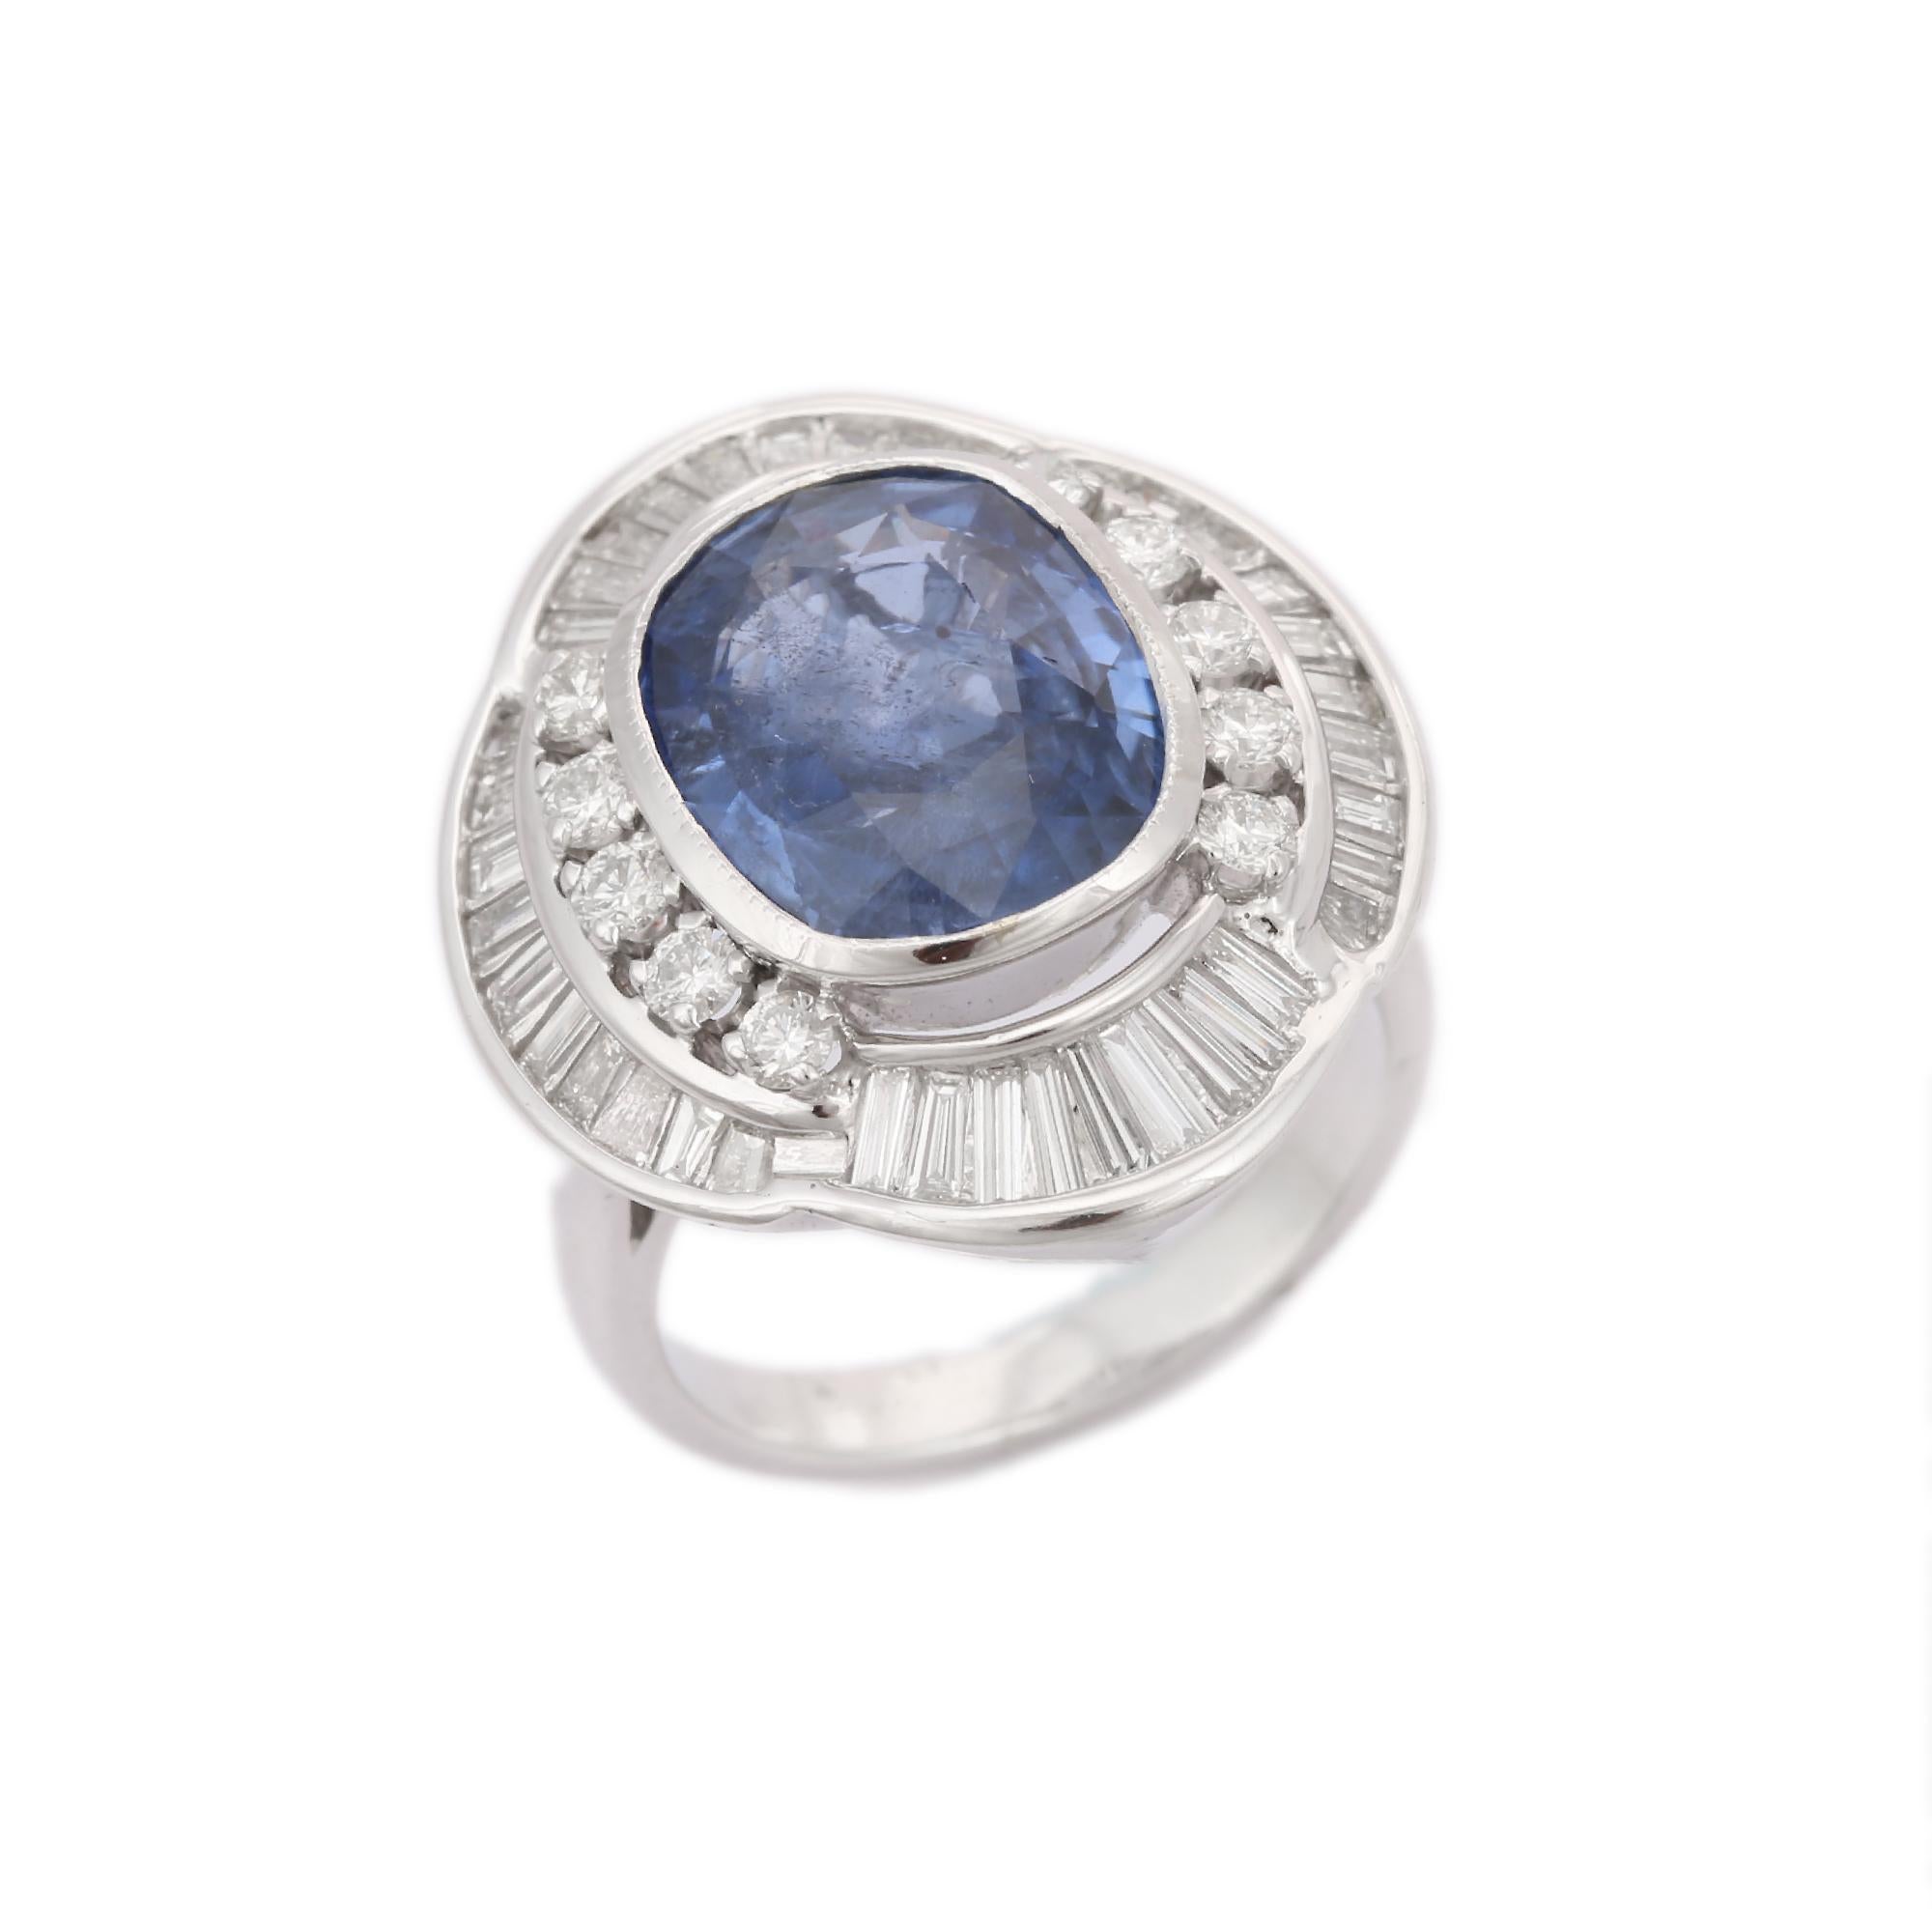 For Sale:  18kt Solid White Gold 6.43 ct Cushion Blue Sapphire Diamond Cocktail Ring 6